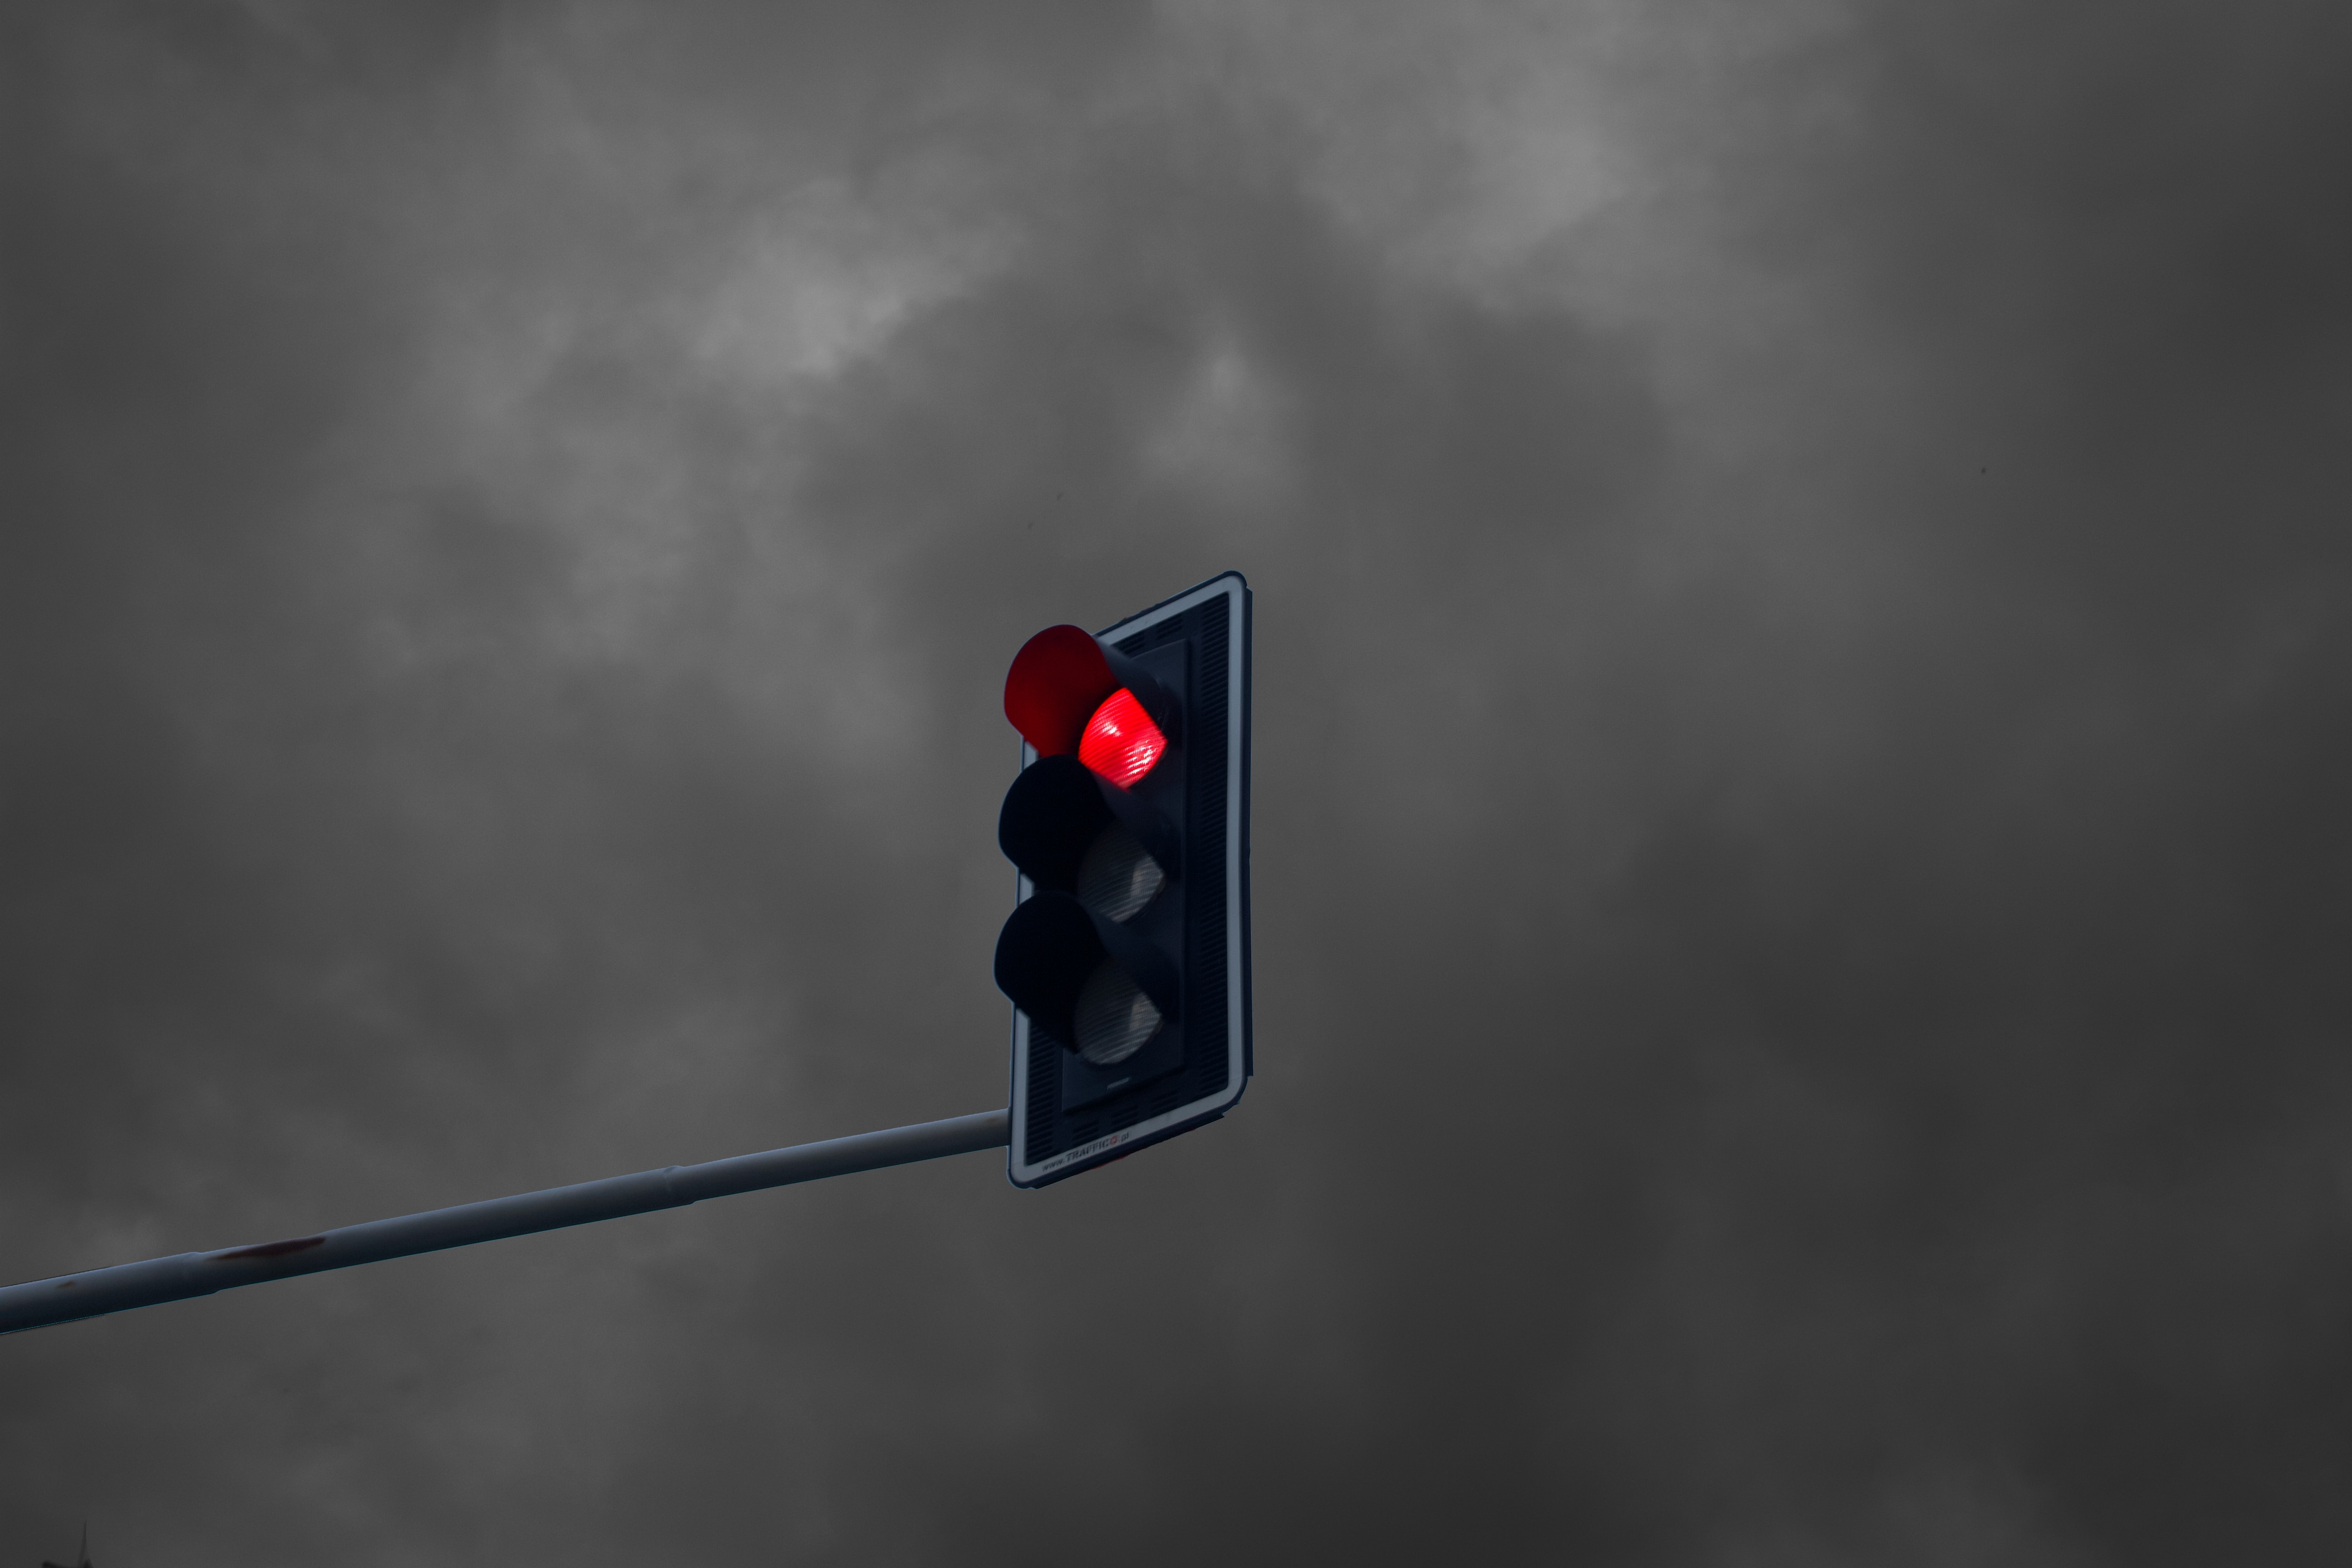 traffic light, clouds, red, miscellanea, miscellaneous, glow cellphone